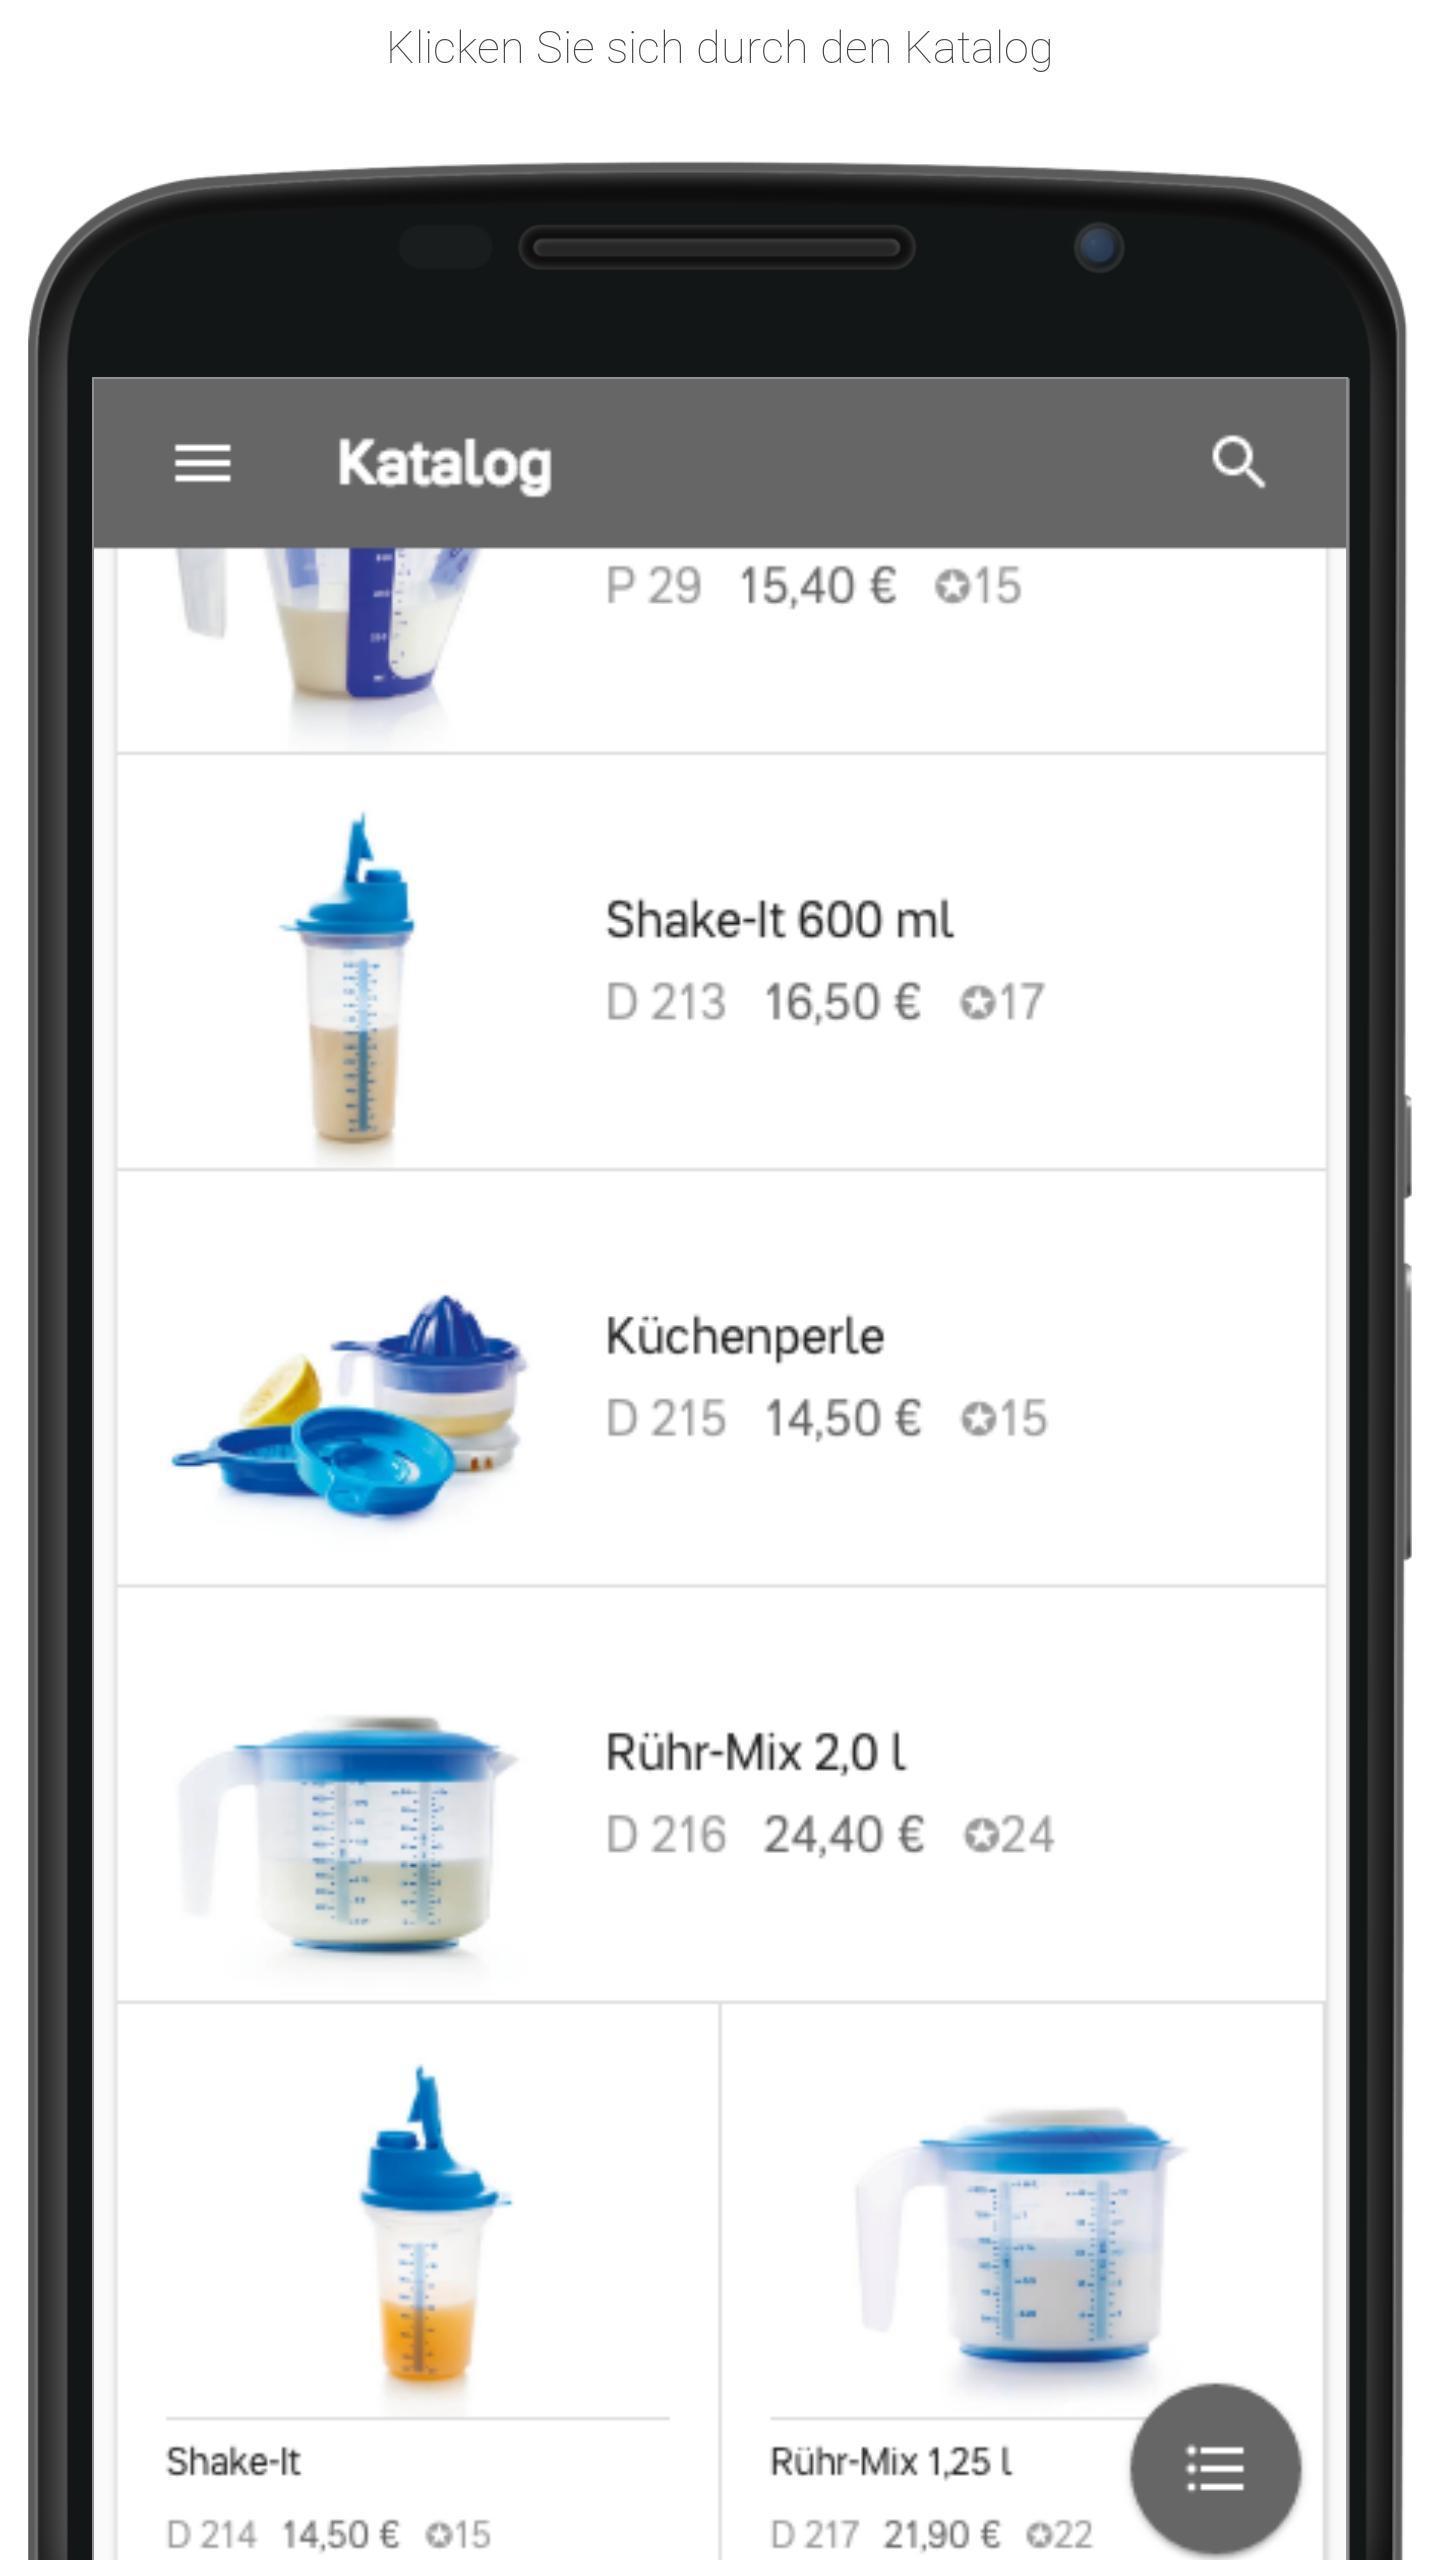 Katalog Tupperware 2017 for Android - APK Download